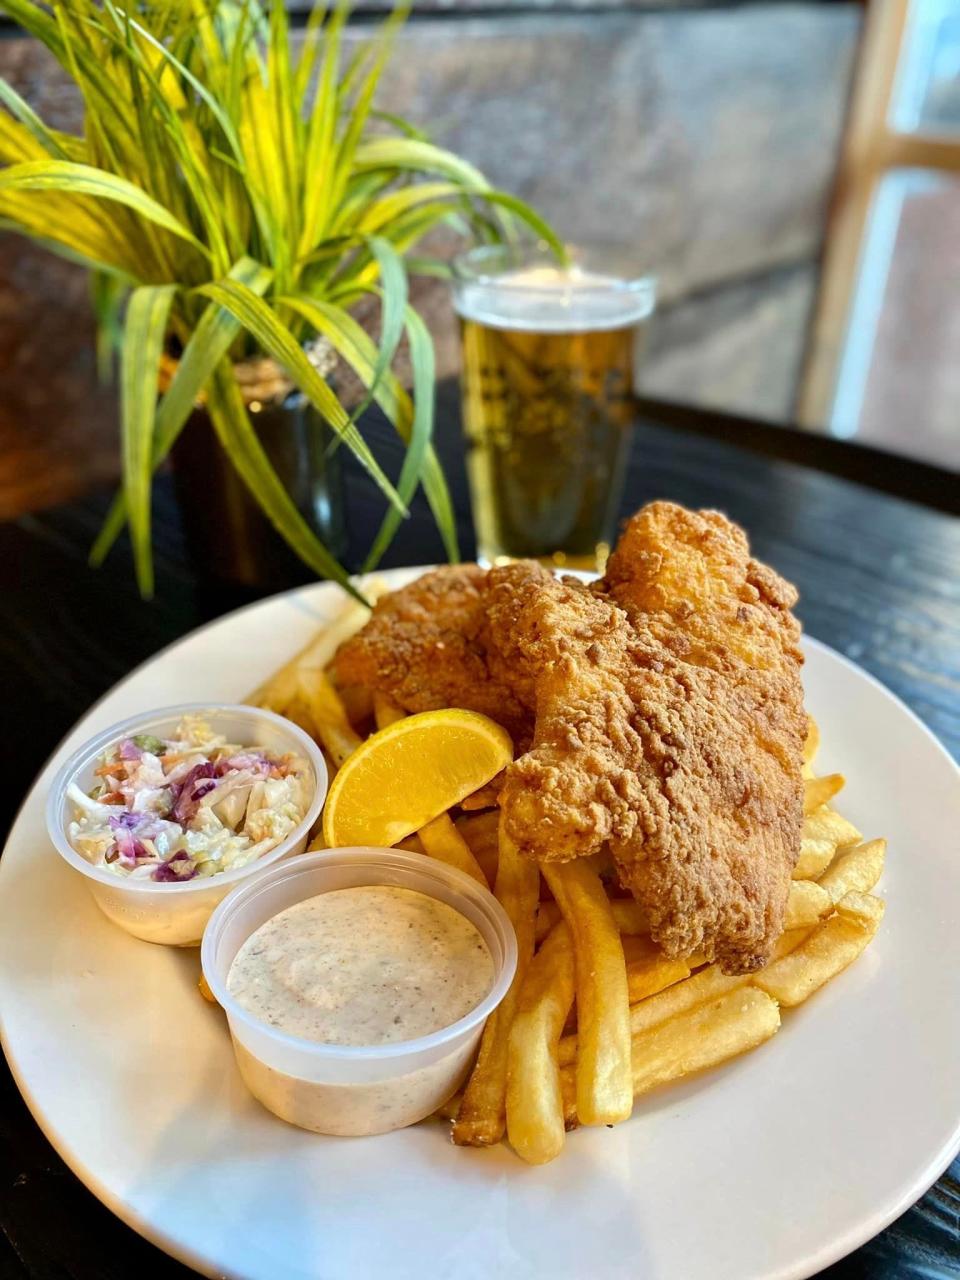 $10 Fish and Chips at the The Vault every Wednesday.